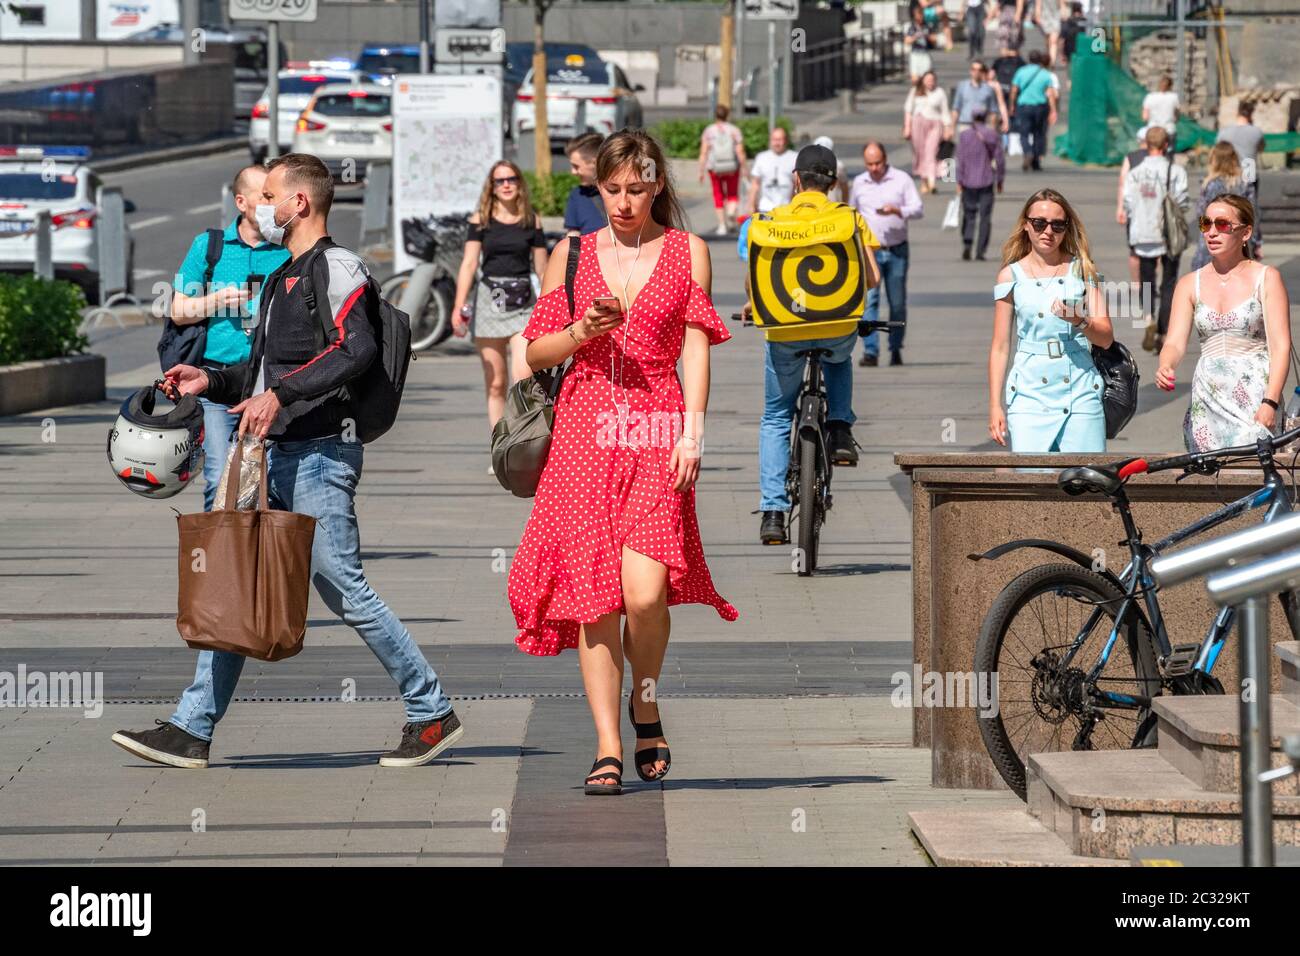 Russia, Moscow. Since 7 June, Moscow has experienced hot weather with daytime temperatures rising over +25 degrees Celsius. On 17 June, the temperatur Stock Photo